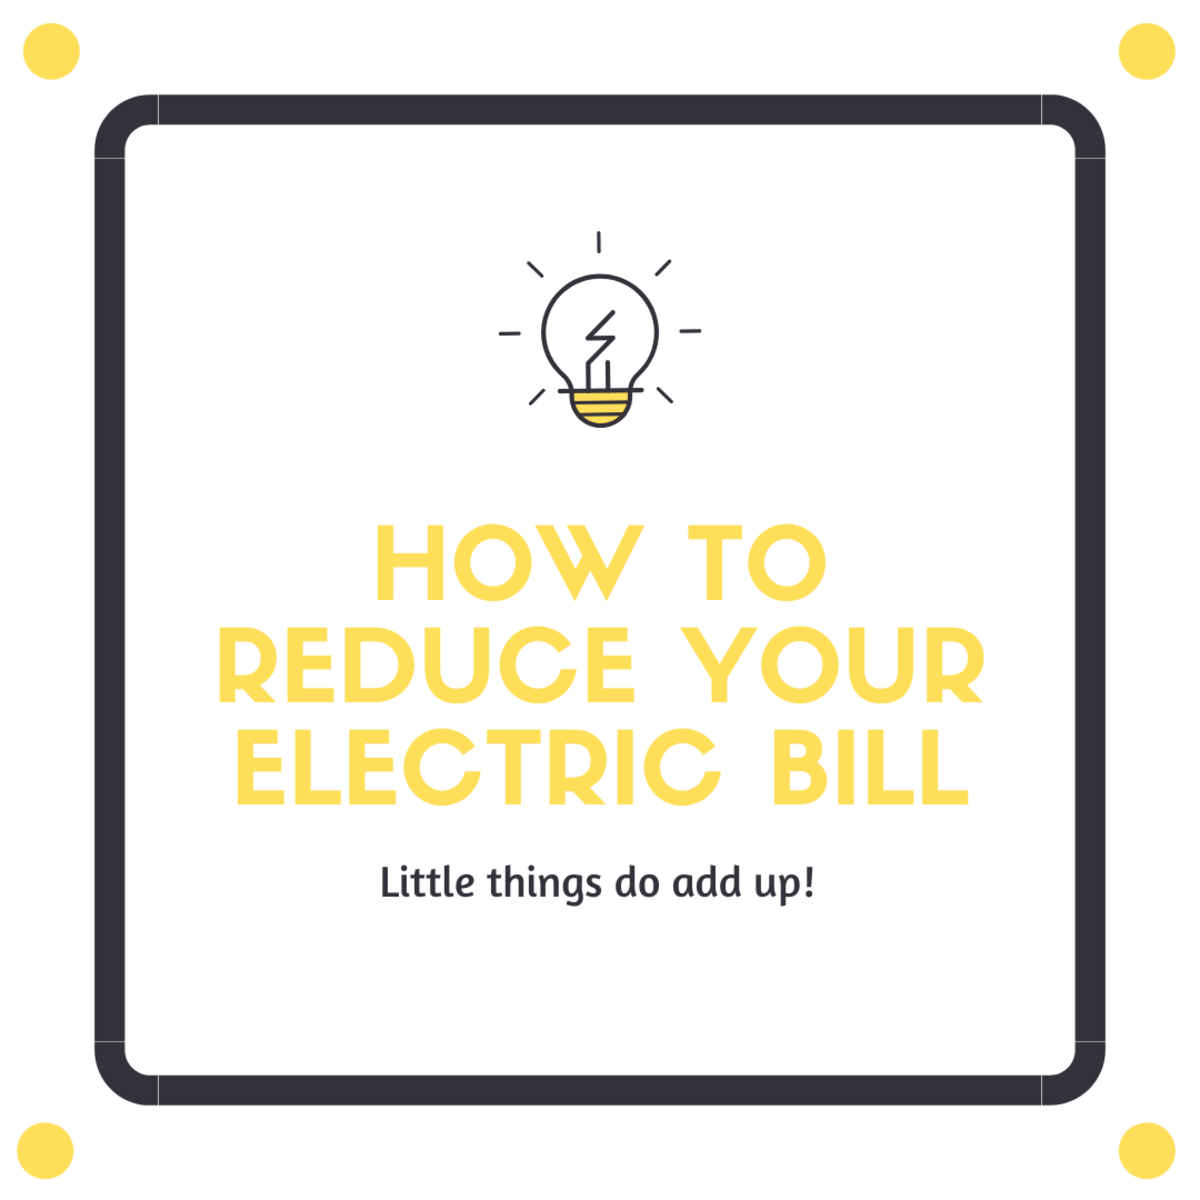 10 Ways to Reduce Your Electric Bill Without Spending a Dime